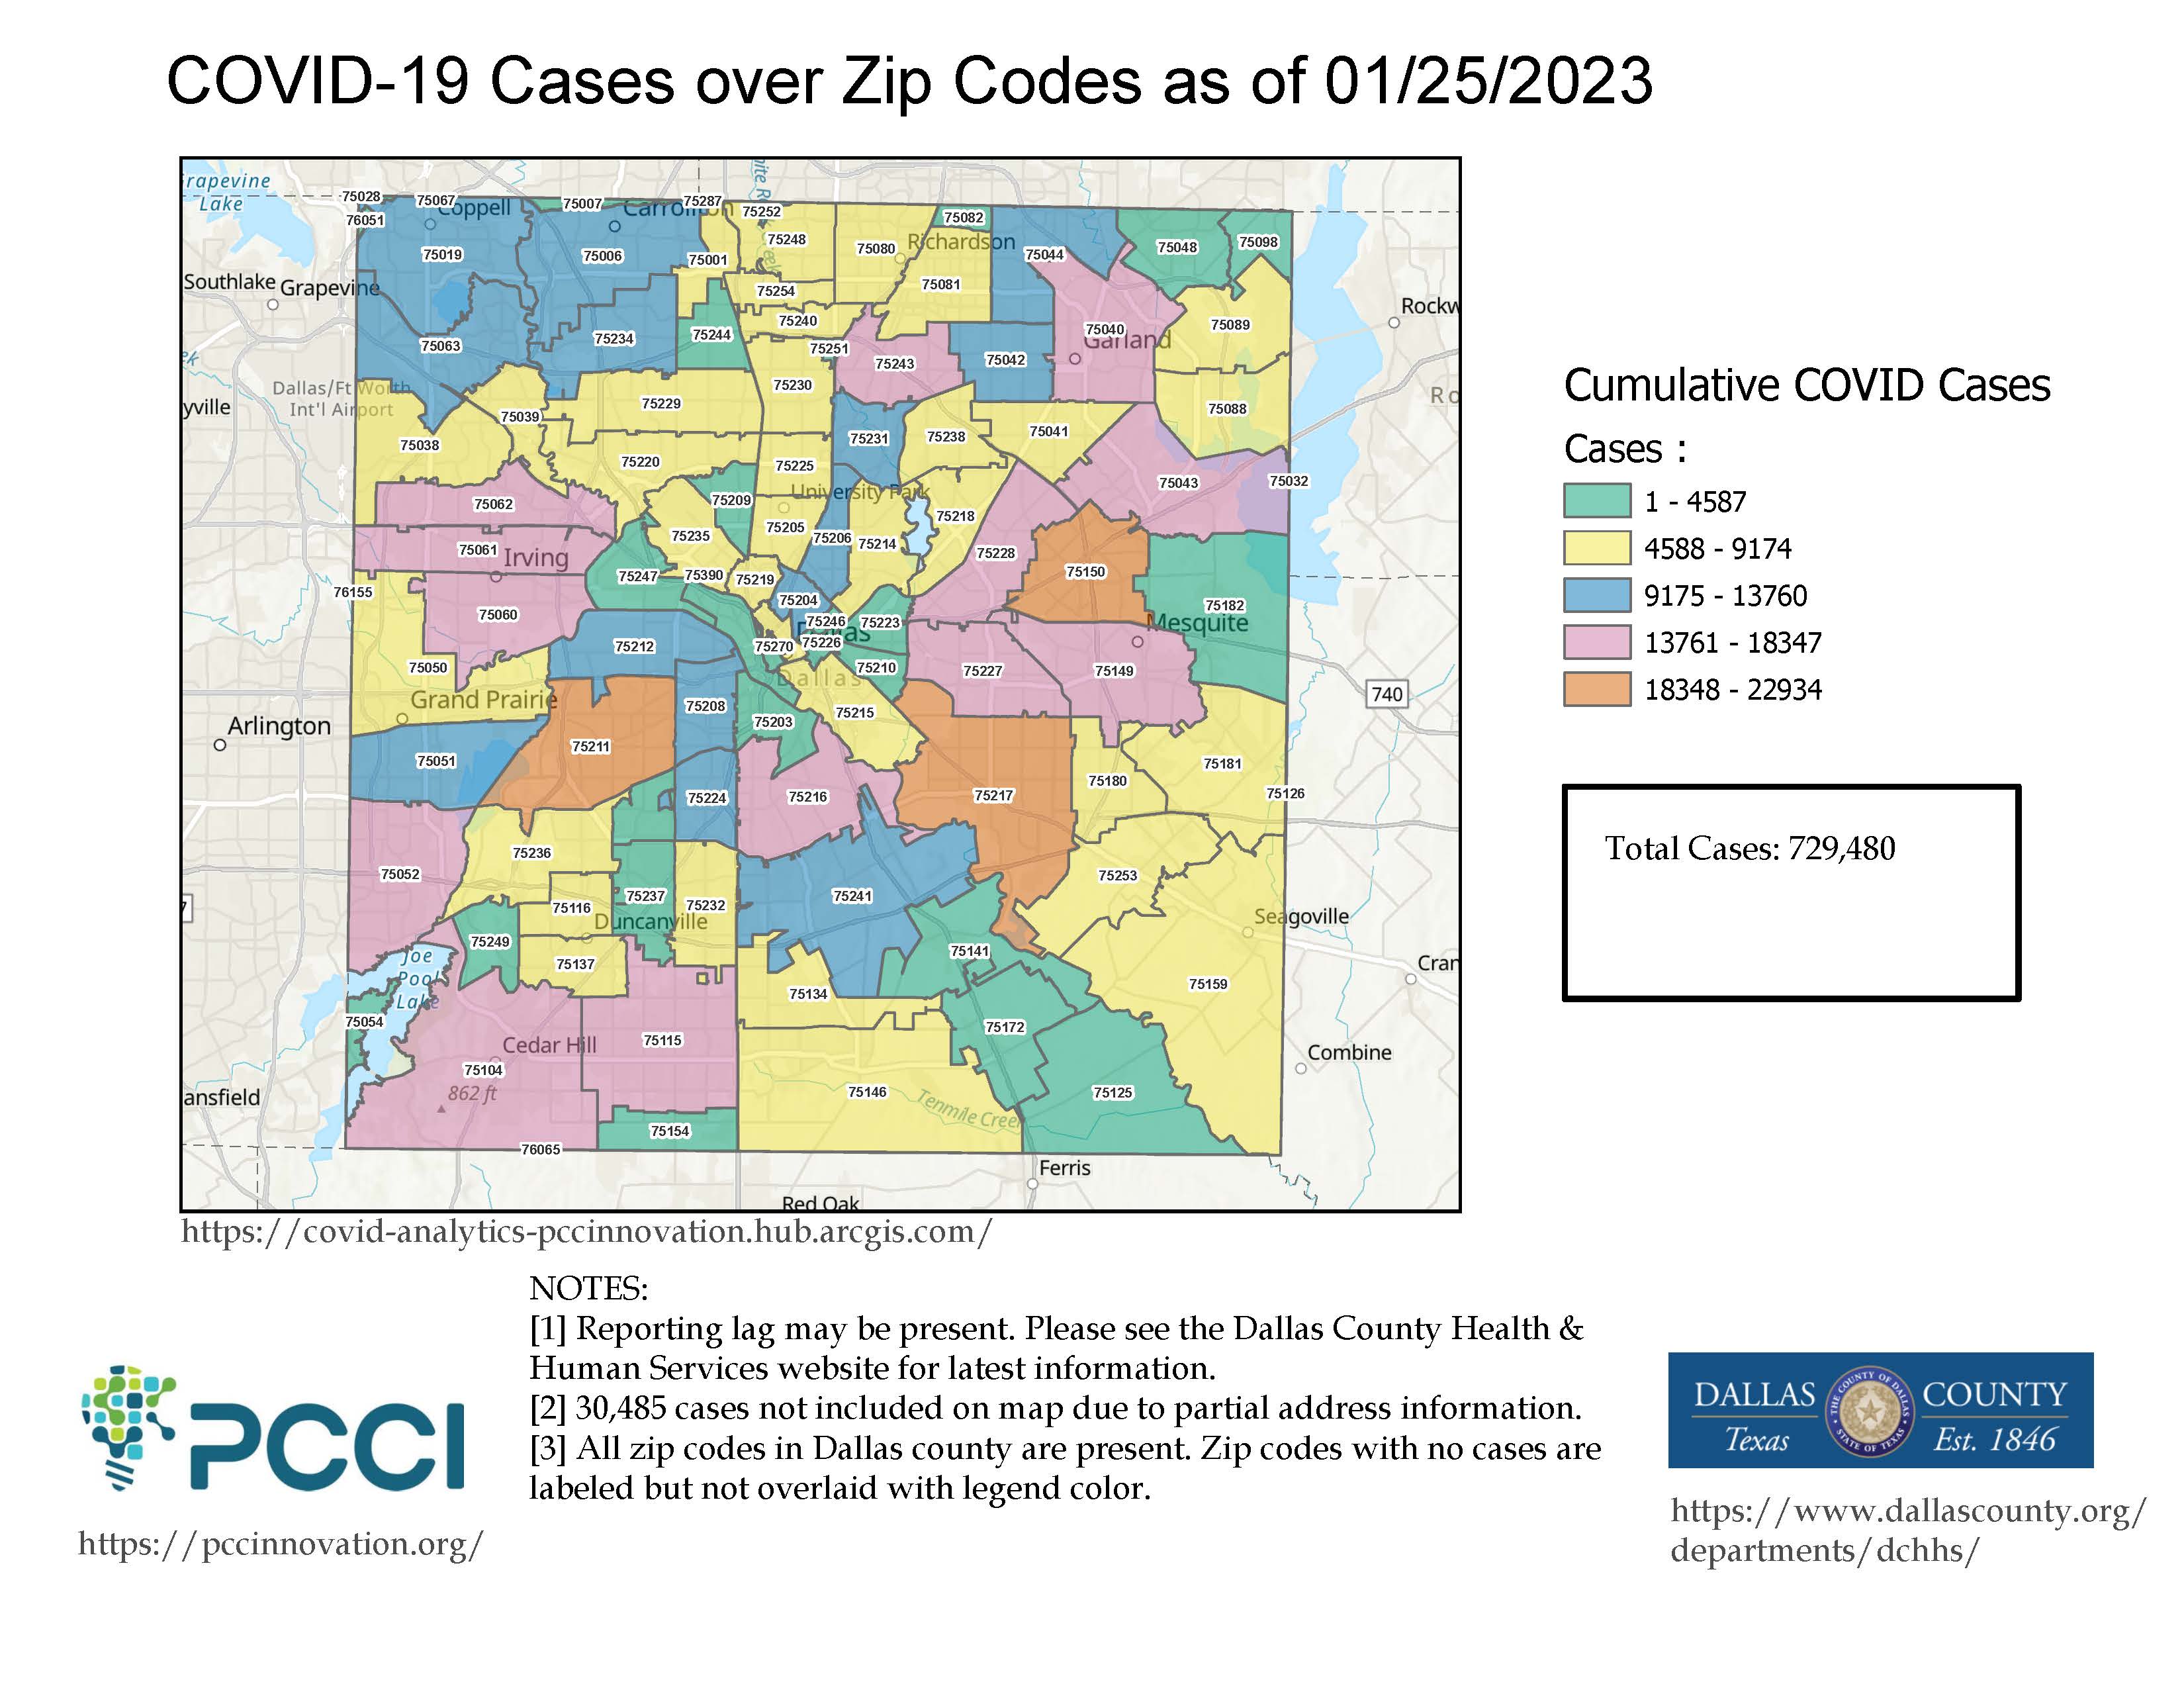 HHS COVID-19 Zip Code Map